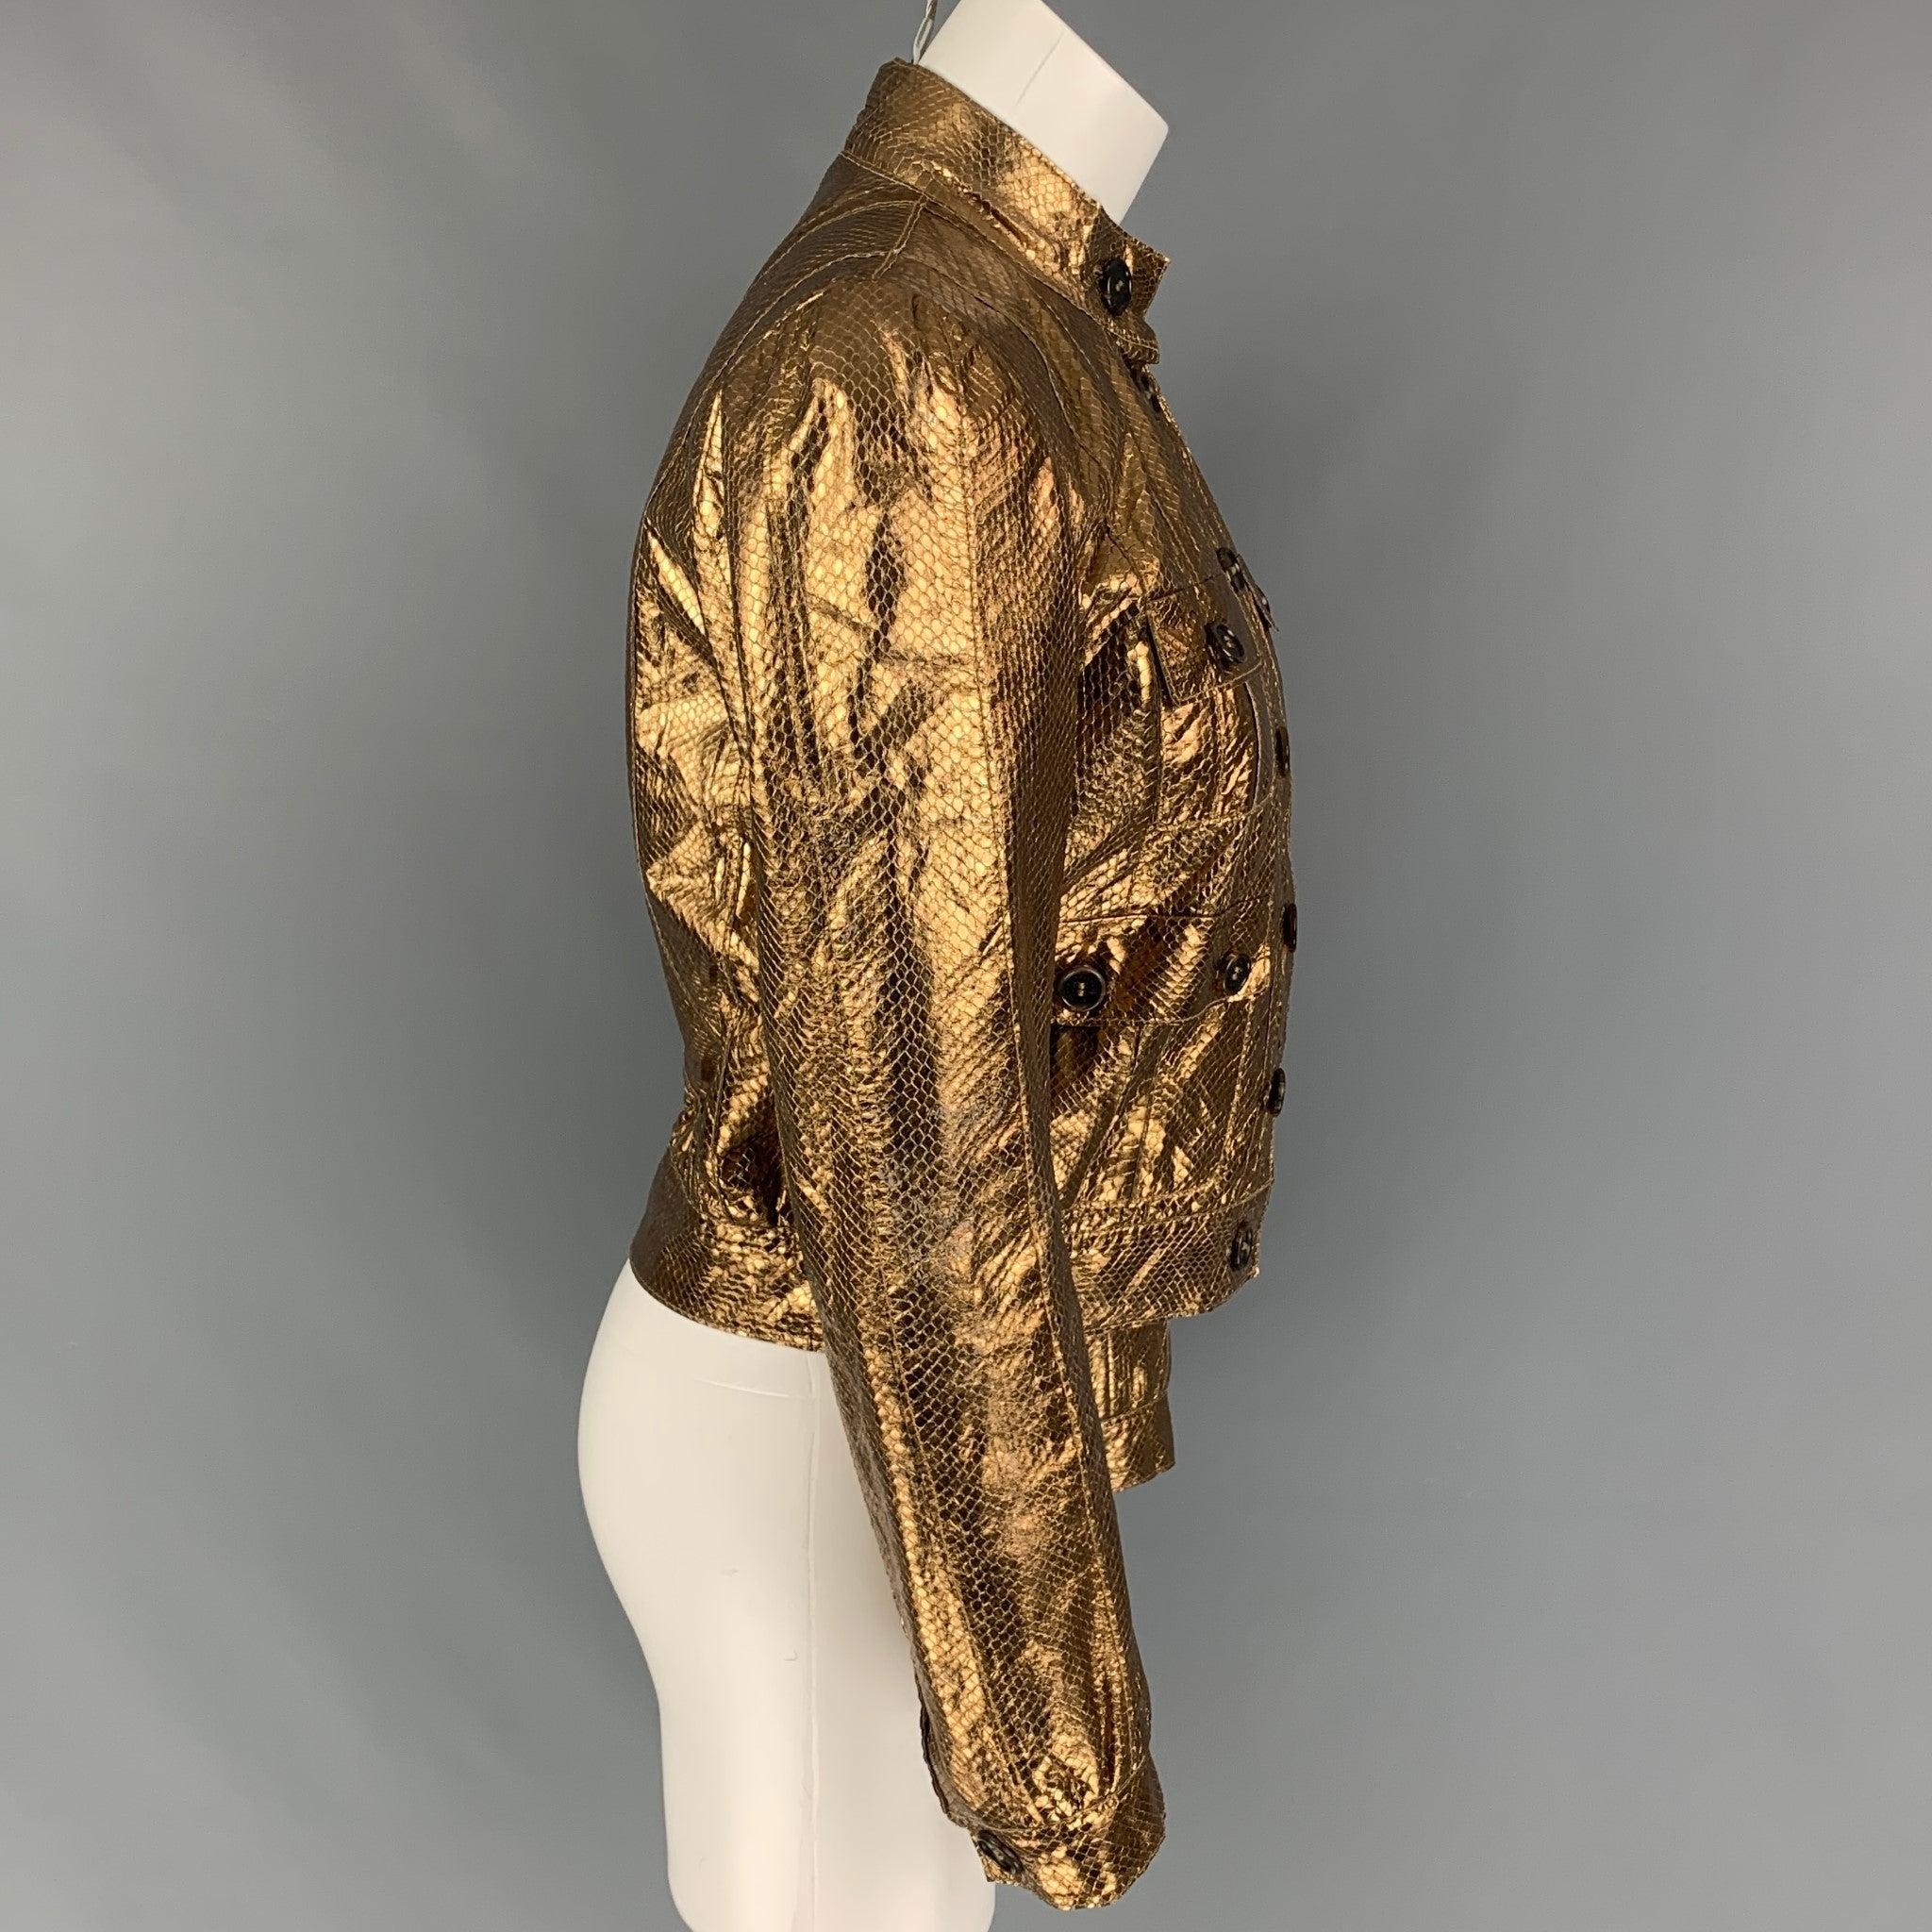 MULBERRY jacket comes in a gold metallic snake skin leather featuring a cropped style, patch pockets, and a buttoned closure.
Very Good
Pre-Owned Condition. 

Marked:   UK 10 / USA 6 / EUR 40 

Measurements: 
 
Shoulder: 15 inches Bust: 38 inches 